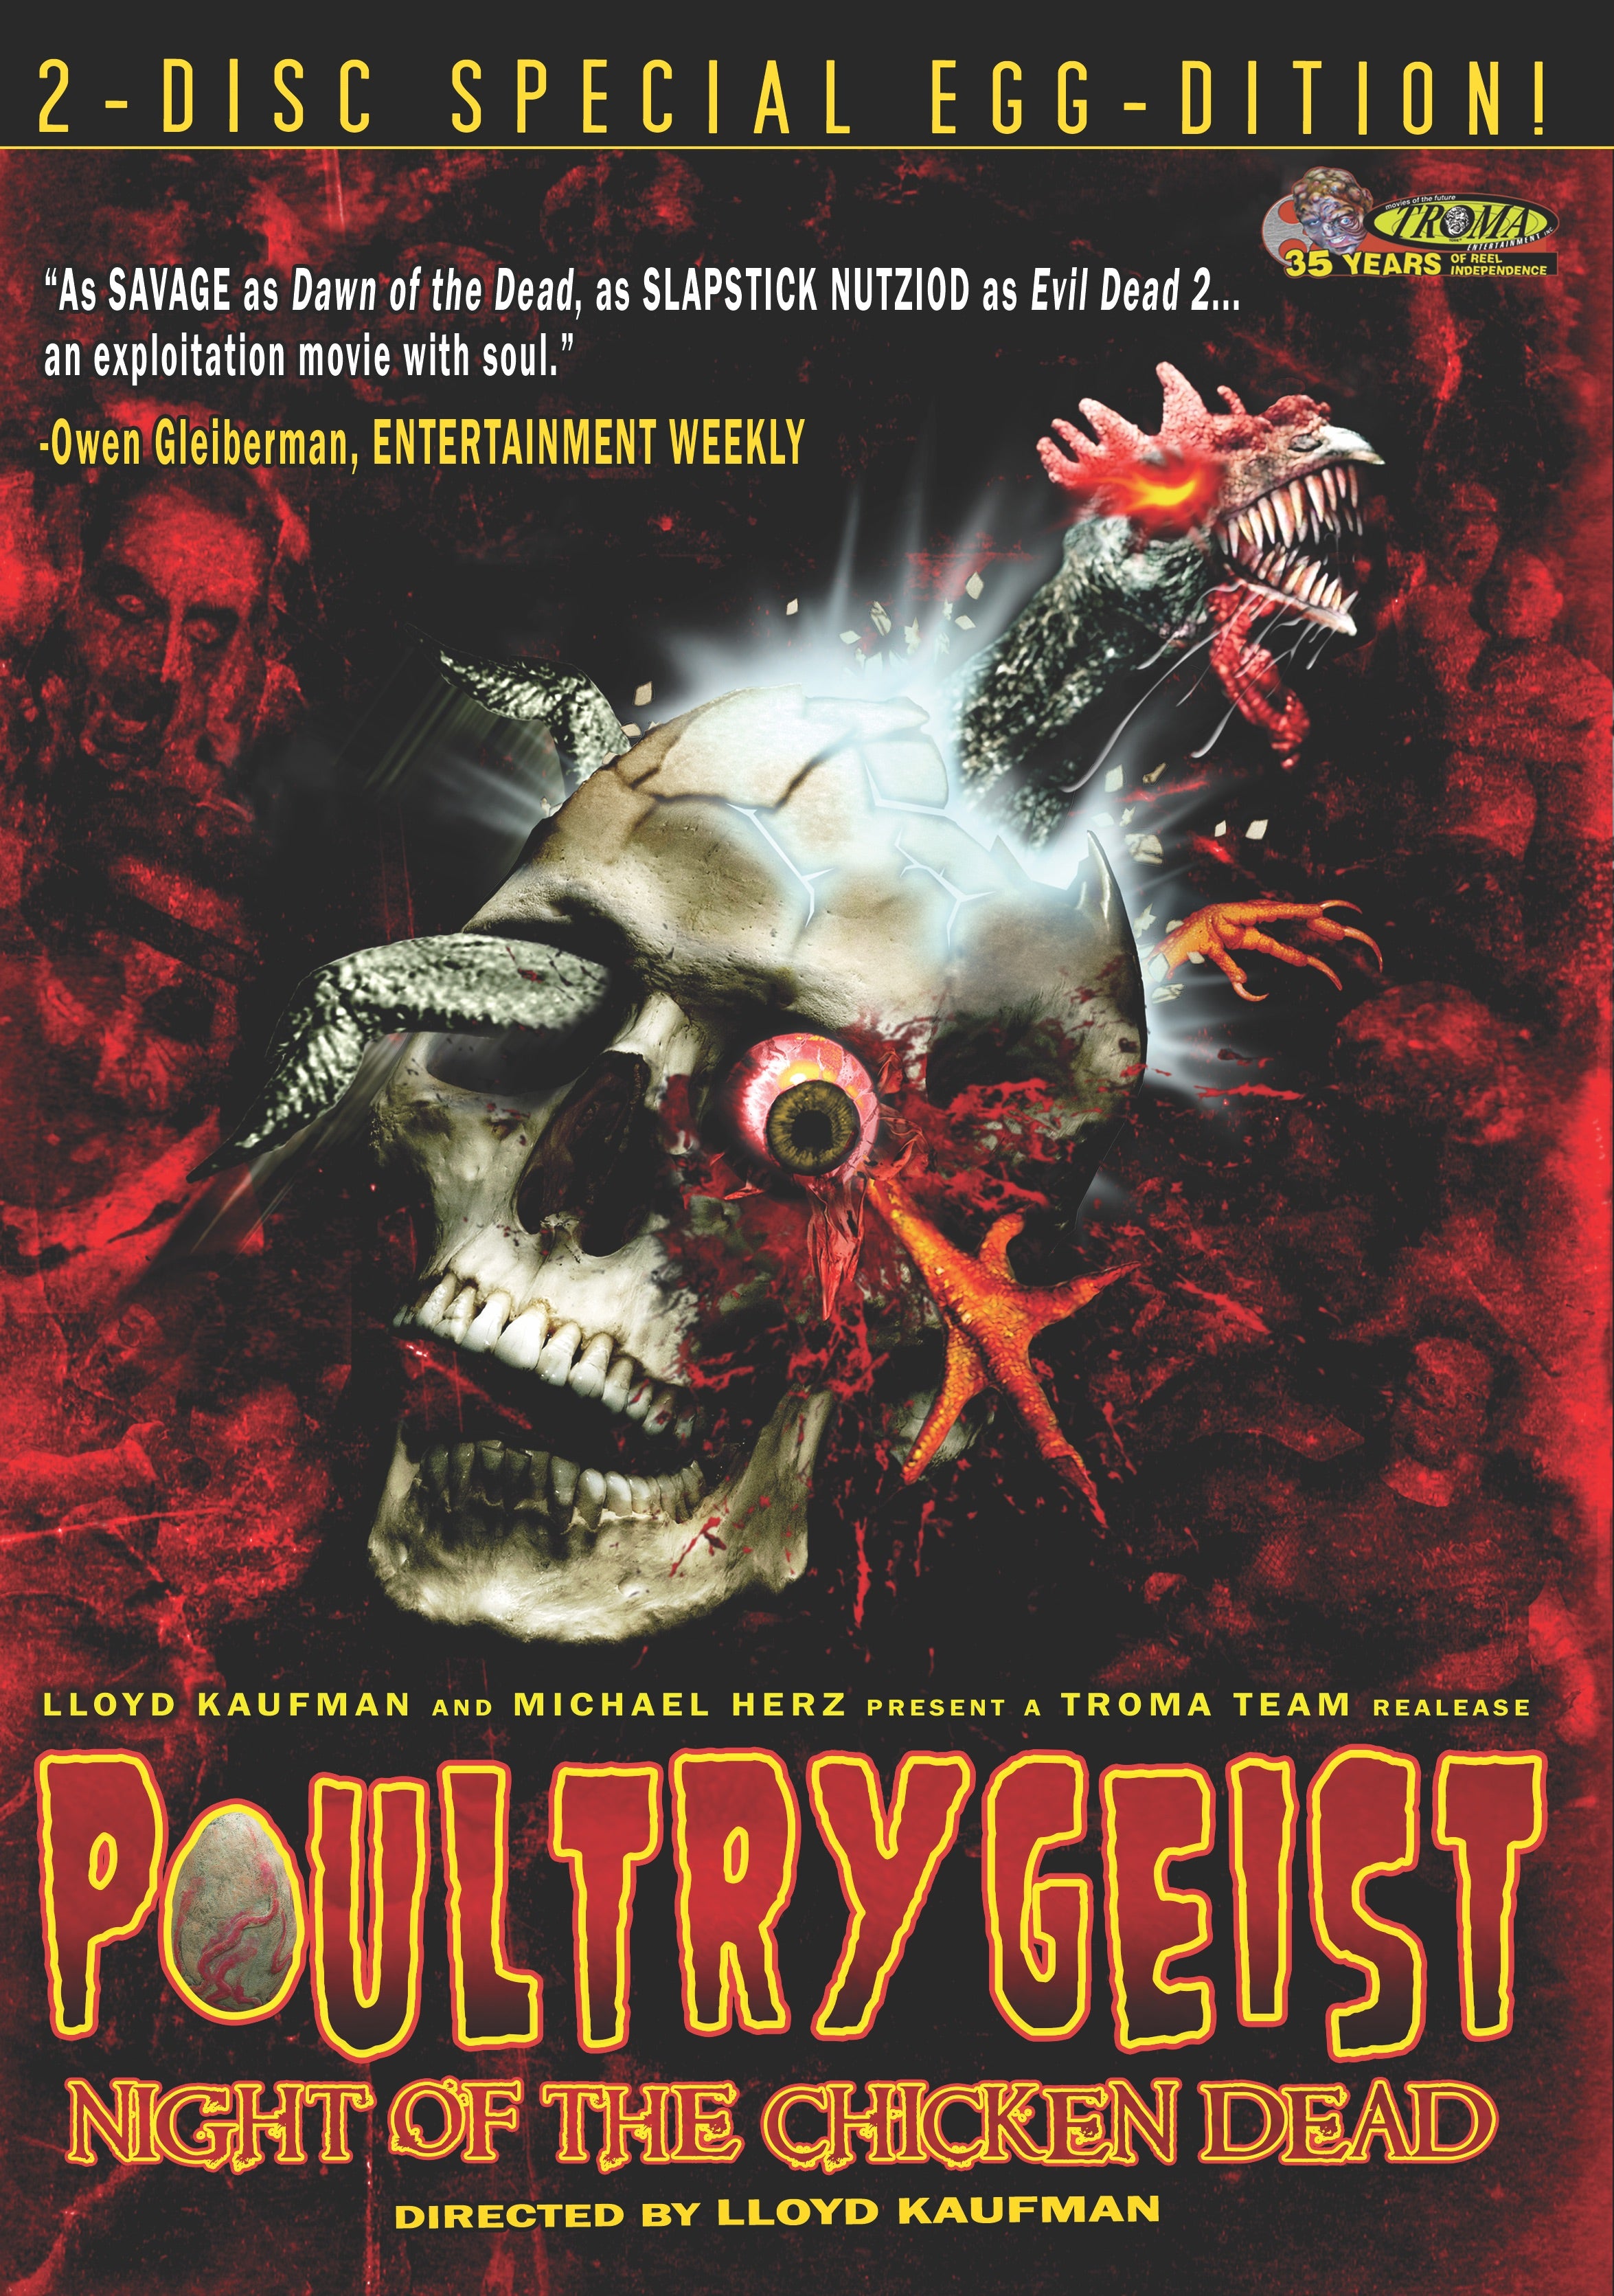 POULTRYGEIST: NIGHT OF THE POULTRY DEAD (2-DISC SPECIAL EGG-DITION) DVD